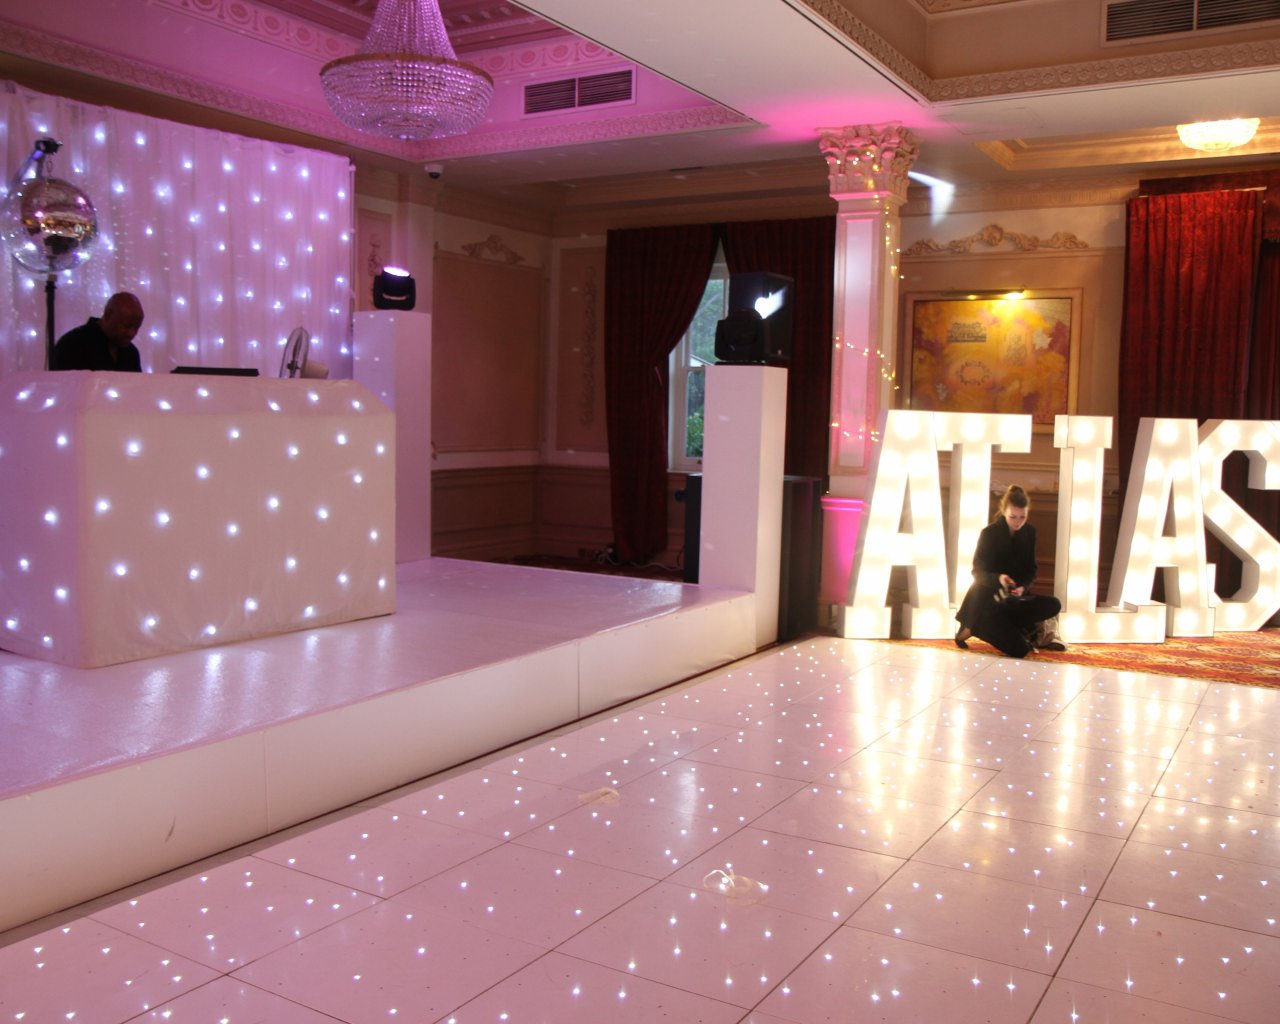 Hire a white dancefloor for weddings, corporate events or parties